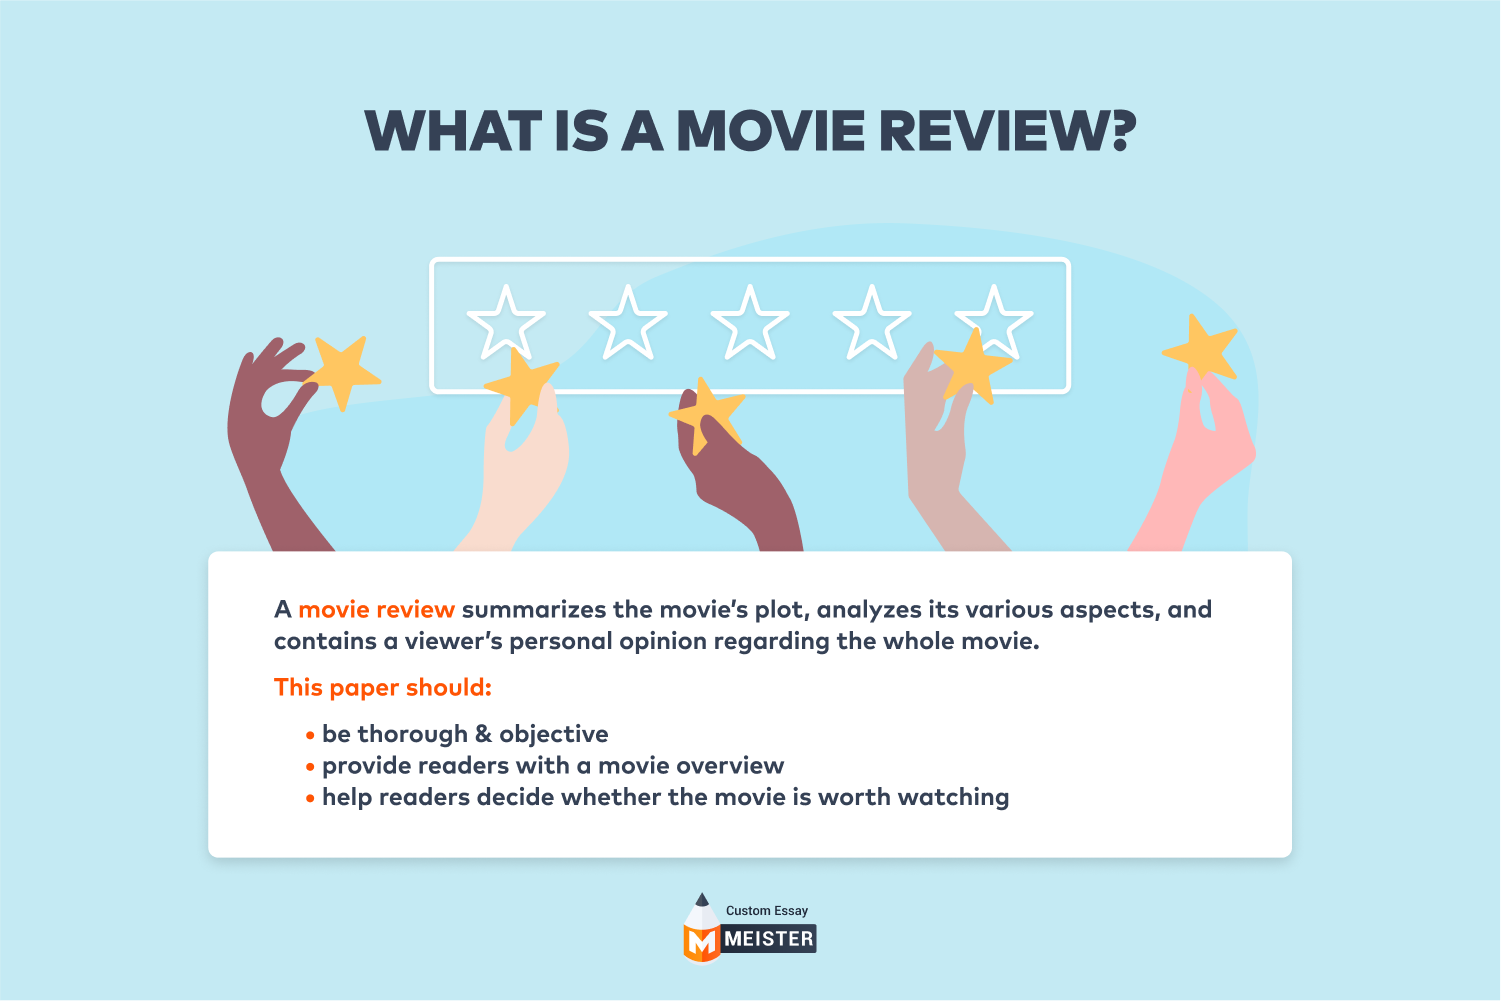 What is a movie review?